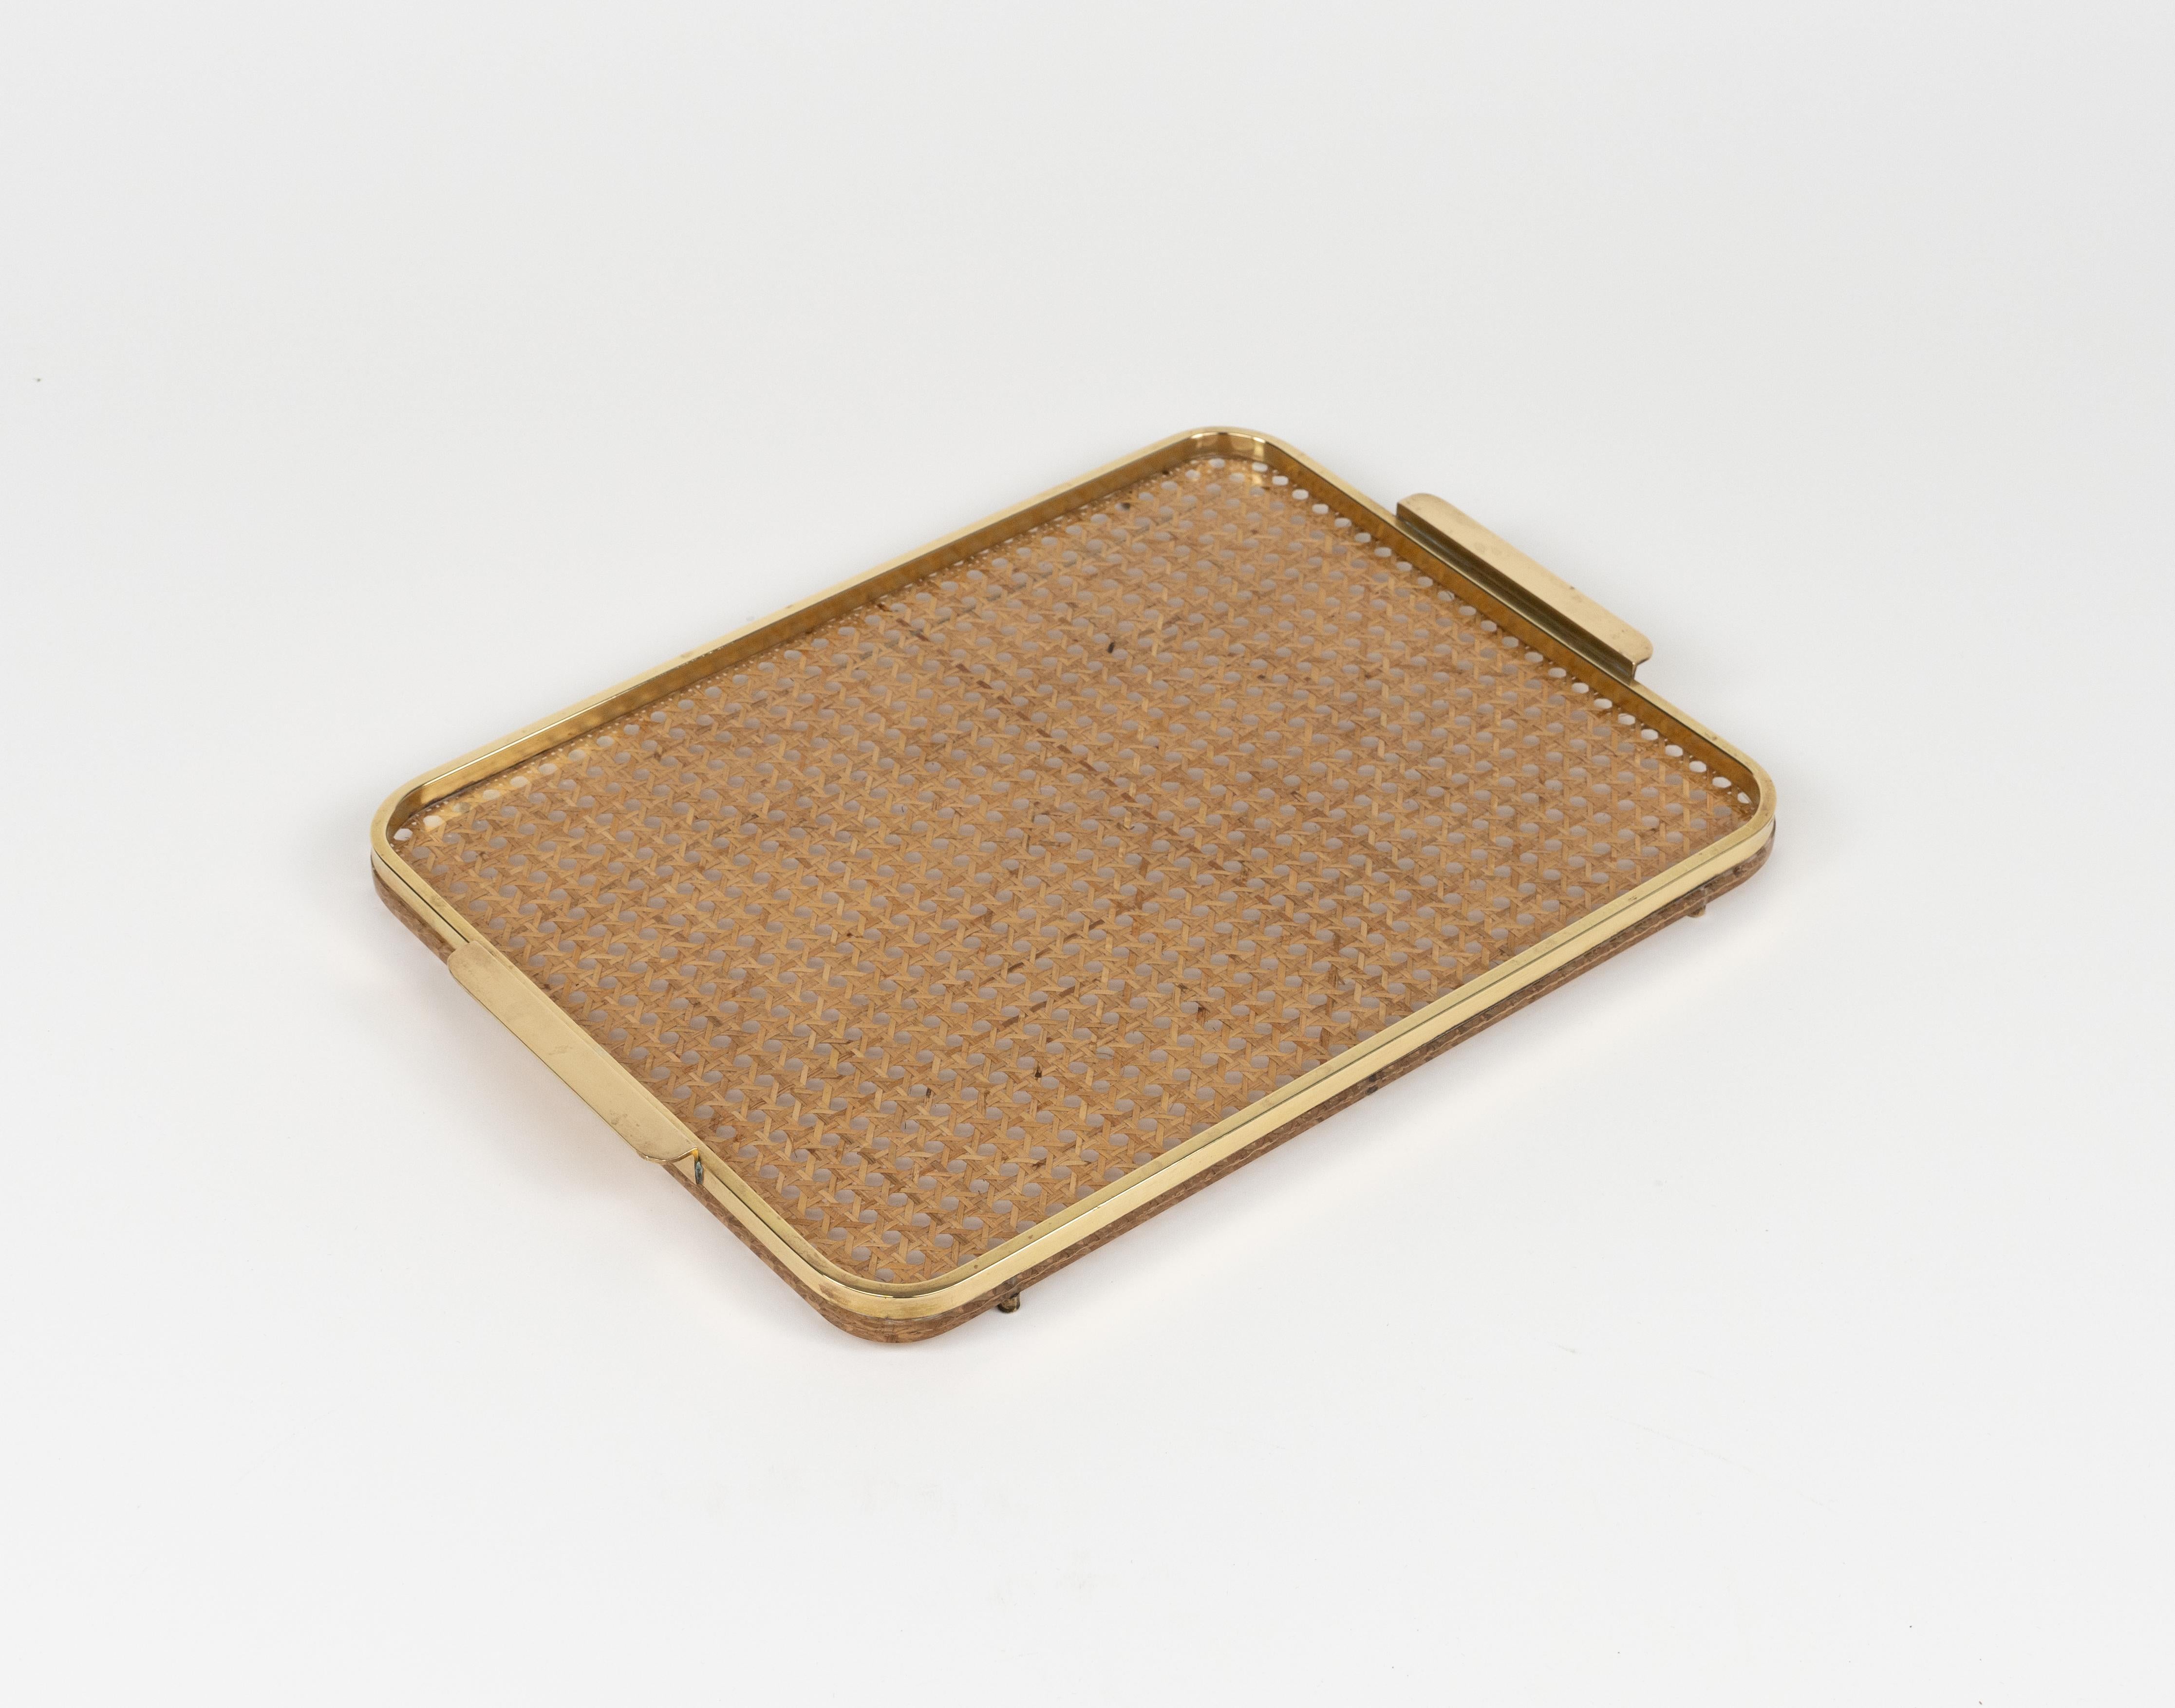 Mid-Century Modern Serving Tray in Lucite, Rattan and Brass Christian Dior Style, Italy, 1970s For Sale